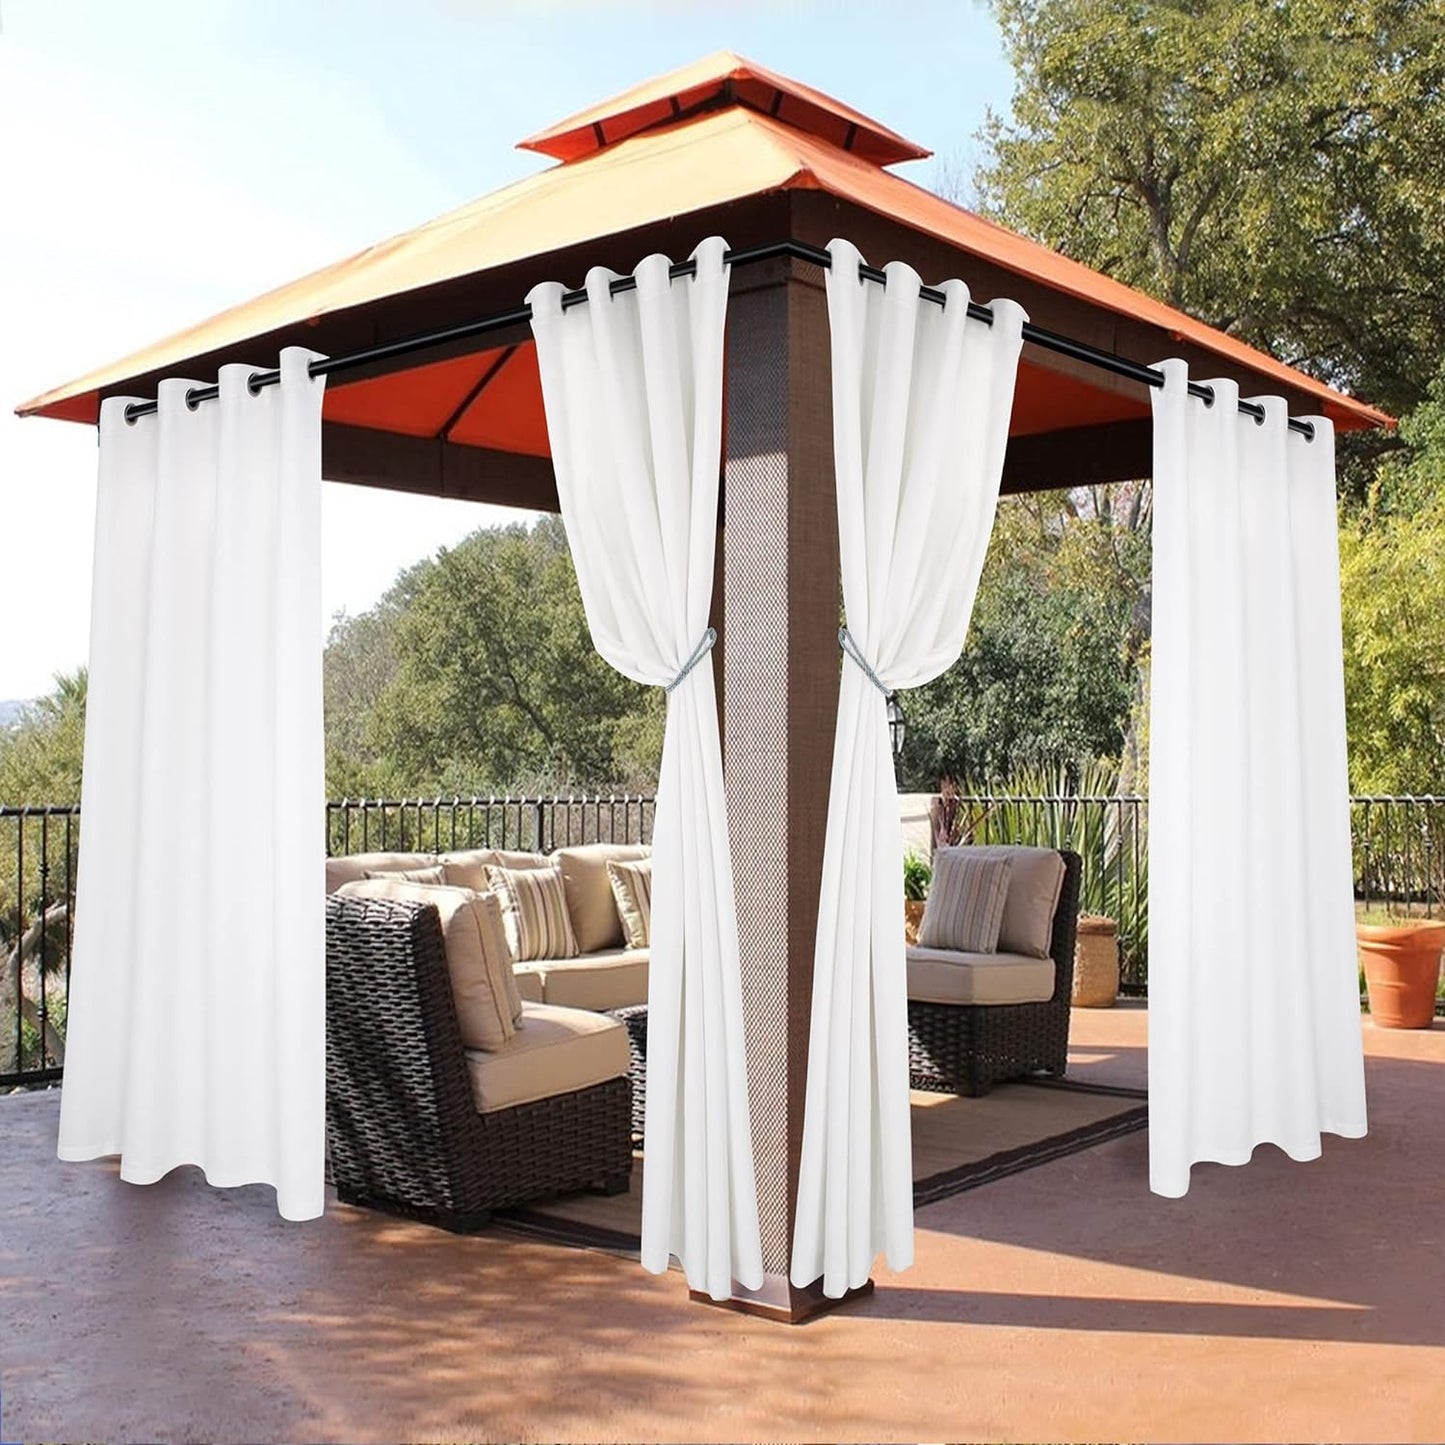 BONZER Outdoor Curtains for Patio Waterproof - Light Blocking Weather Resistant Privacy Grommet Blackout Curtains for Gazebo, Porch, Pergola, Cabana, Deck, Sunroom, 1 Panel, 52W X 84L Inch, Silver  BONZER White 52W X 120 Inch 